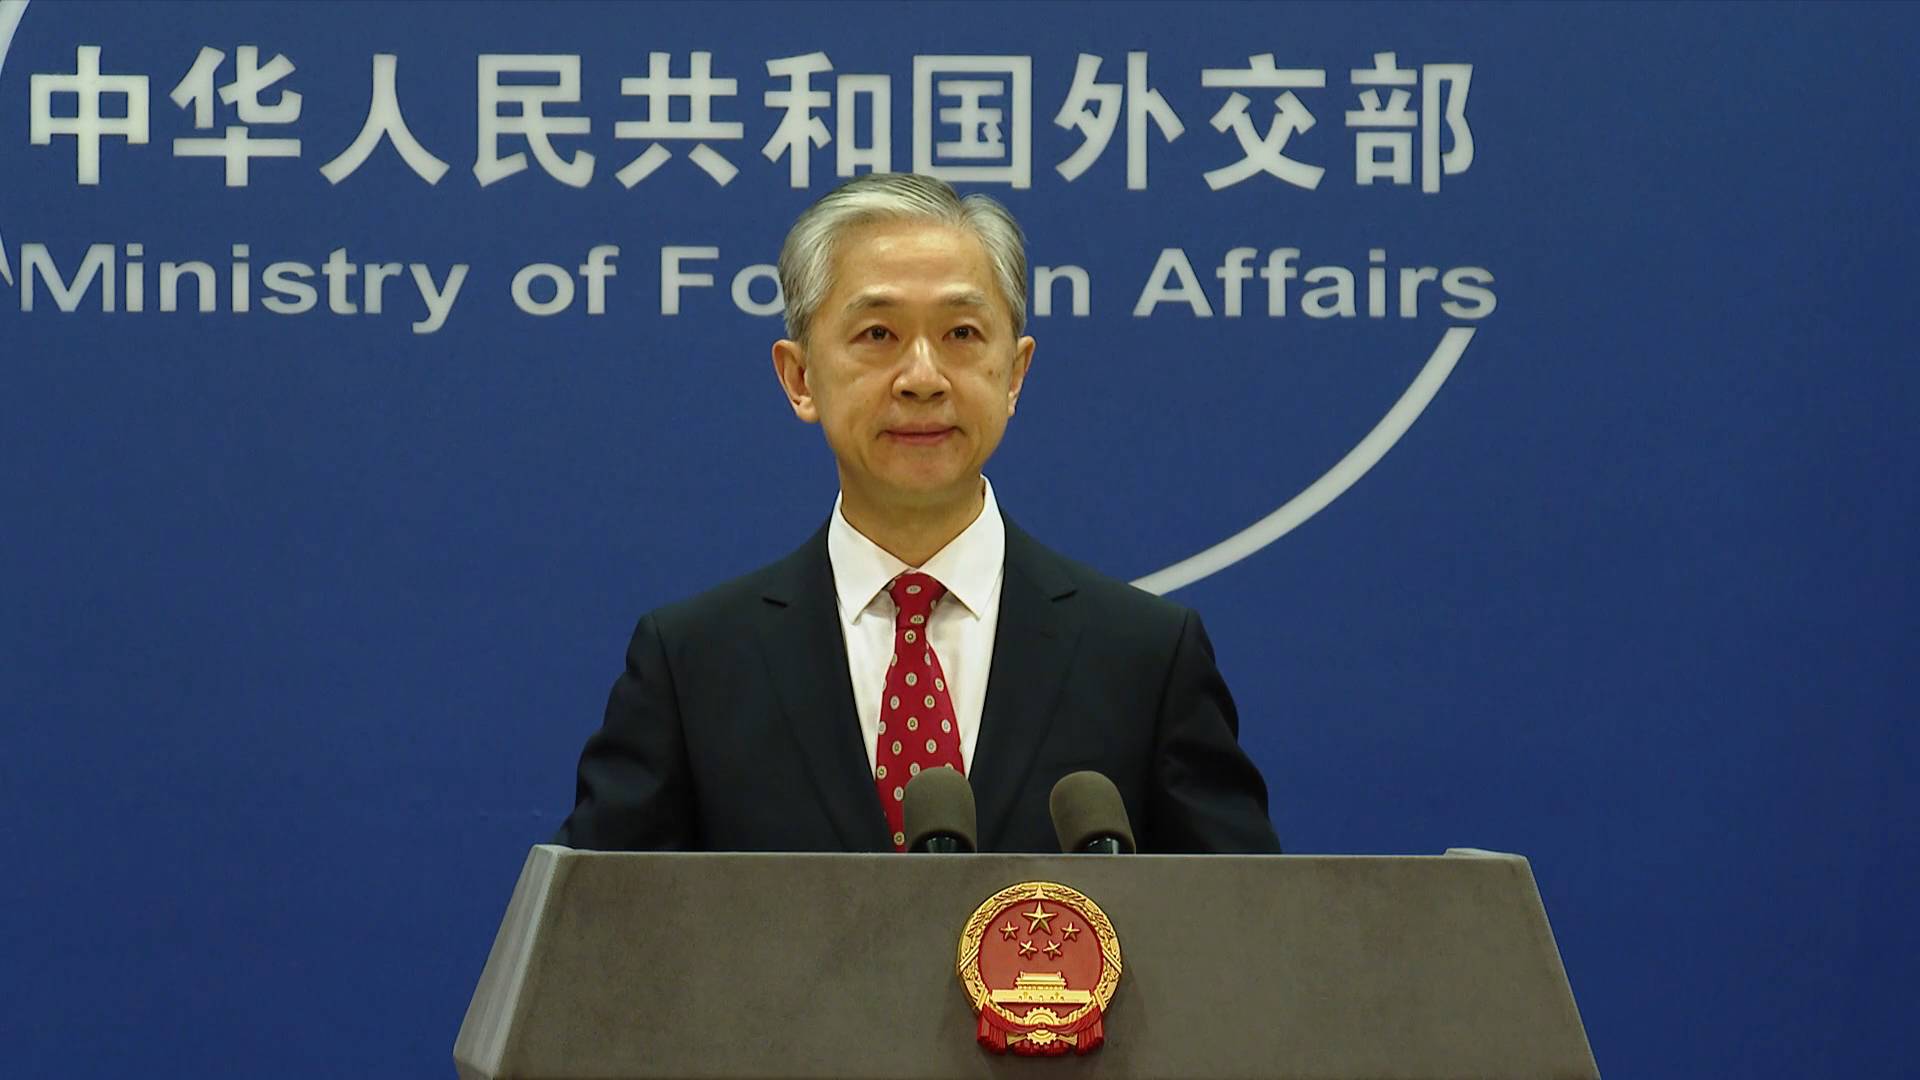 GLOBALink | China highly appreciates Nicaragua's decision to sever "diplomatic relations" with Taiwan: FM spokesperson